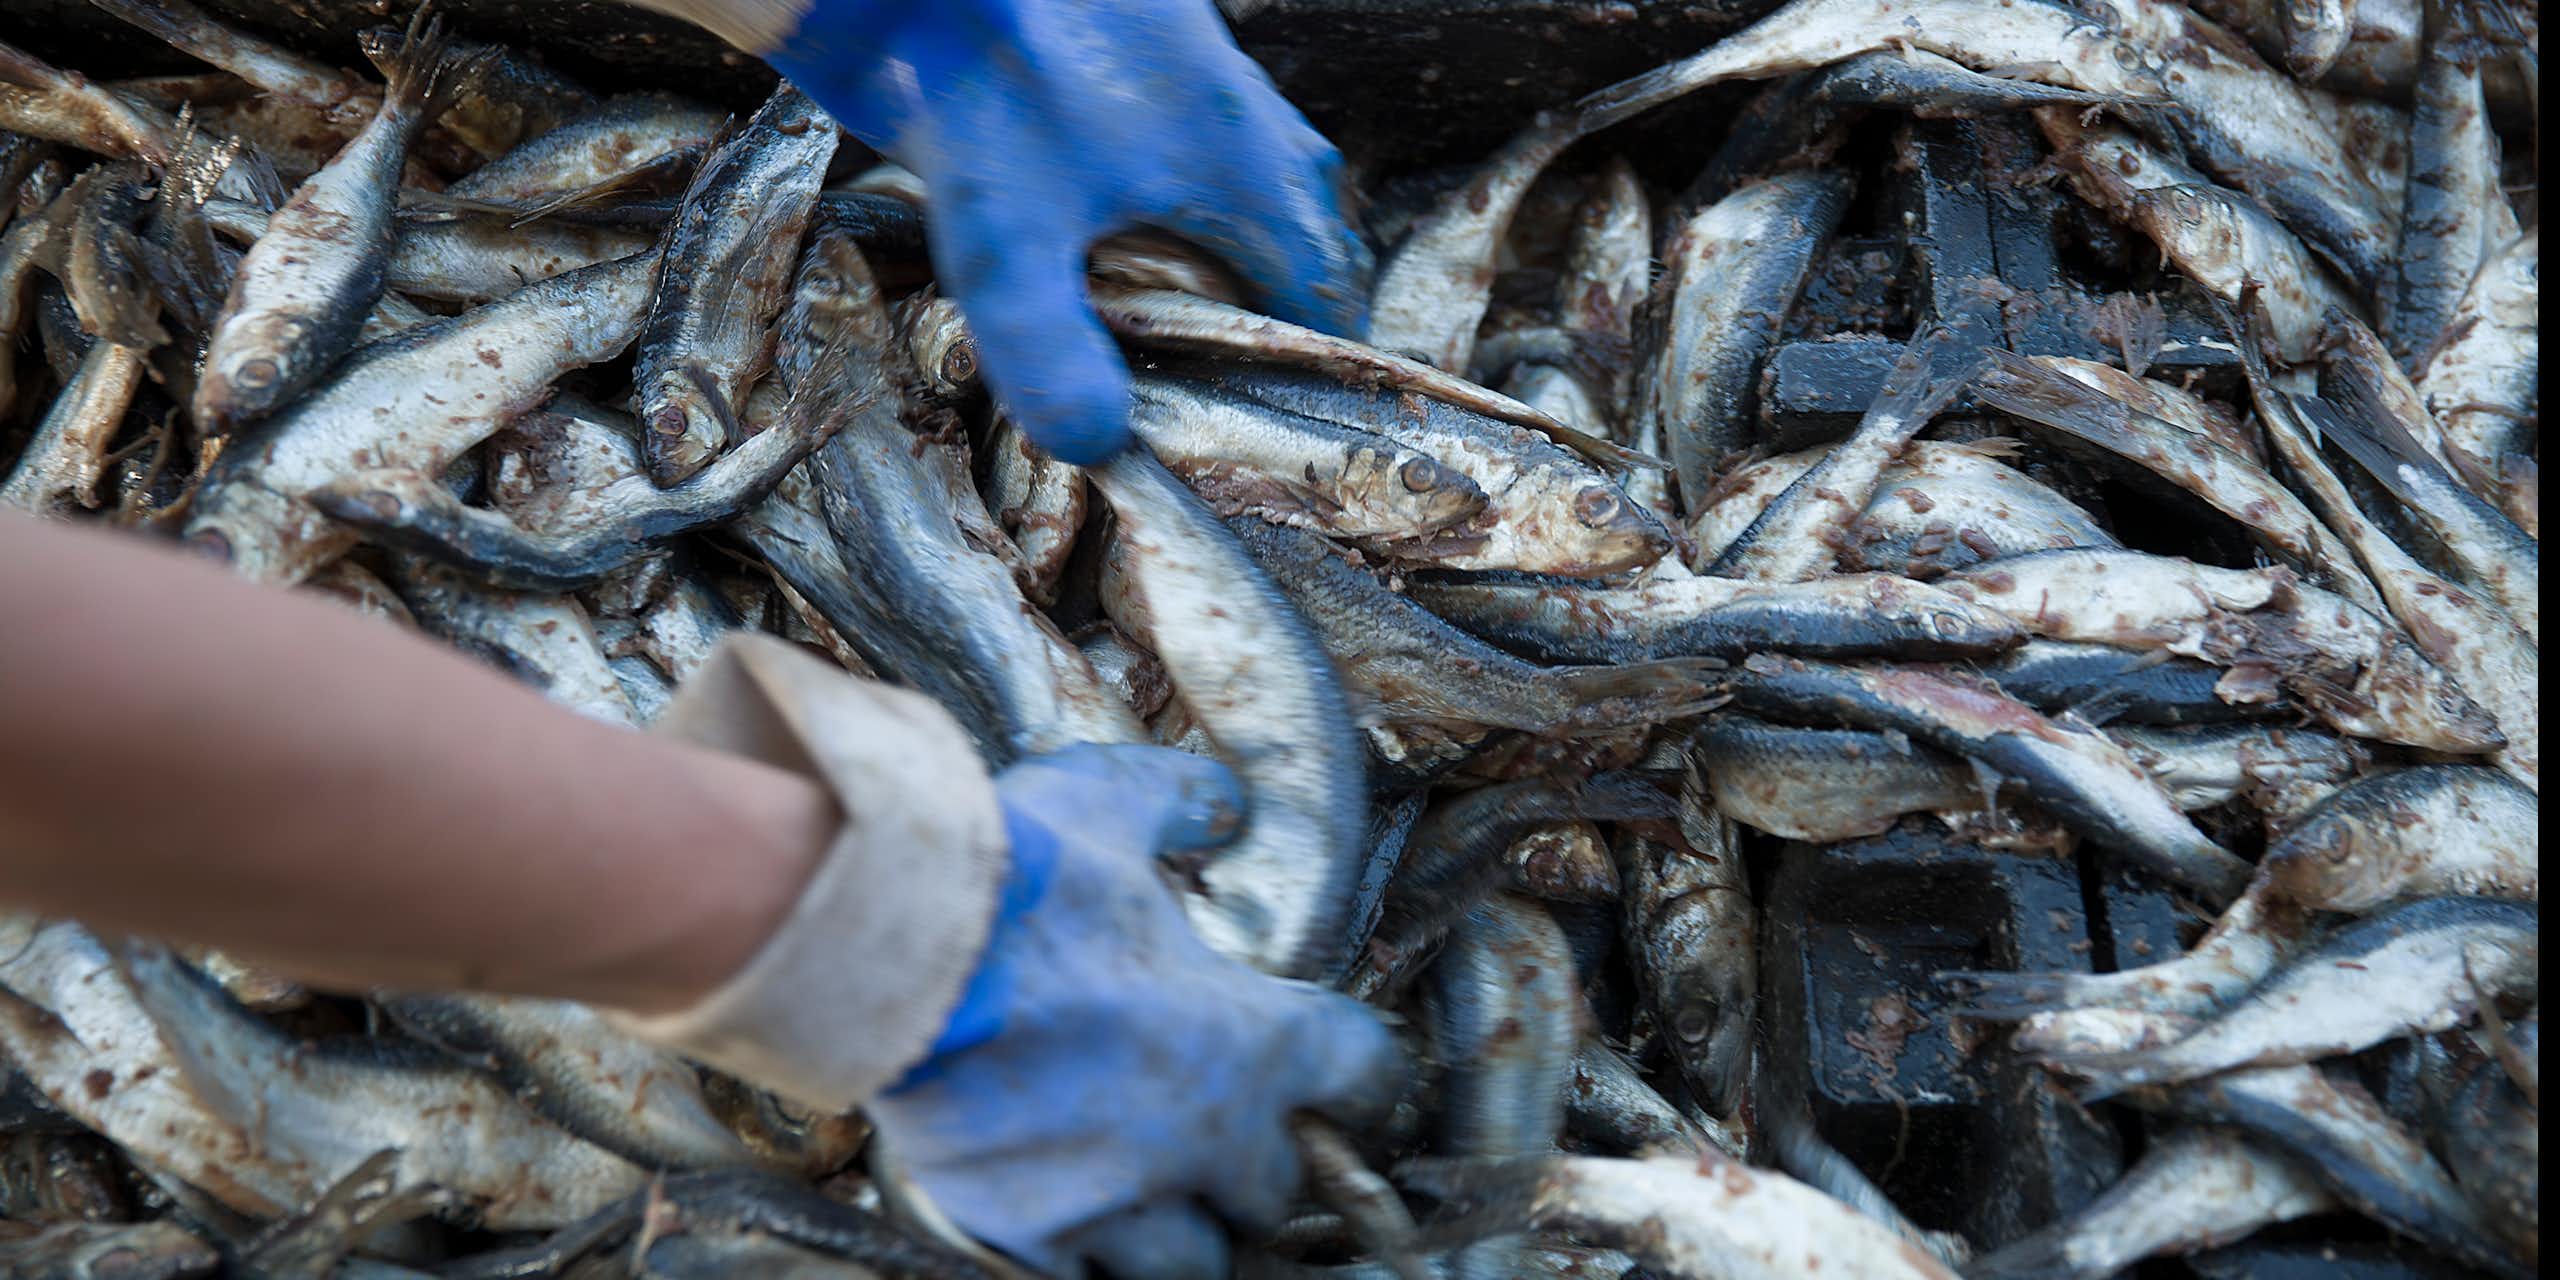 Gloved hands sort through a tray of Atlantic herring